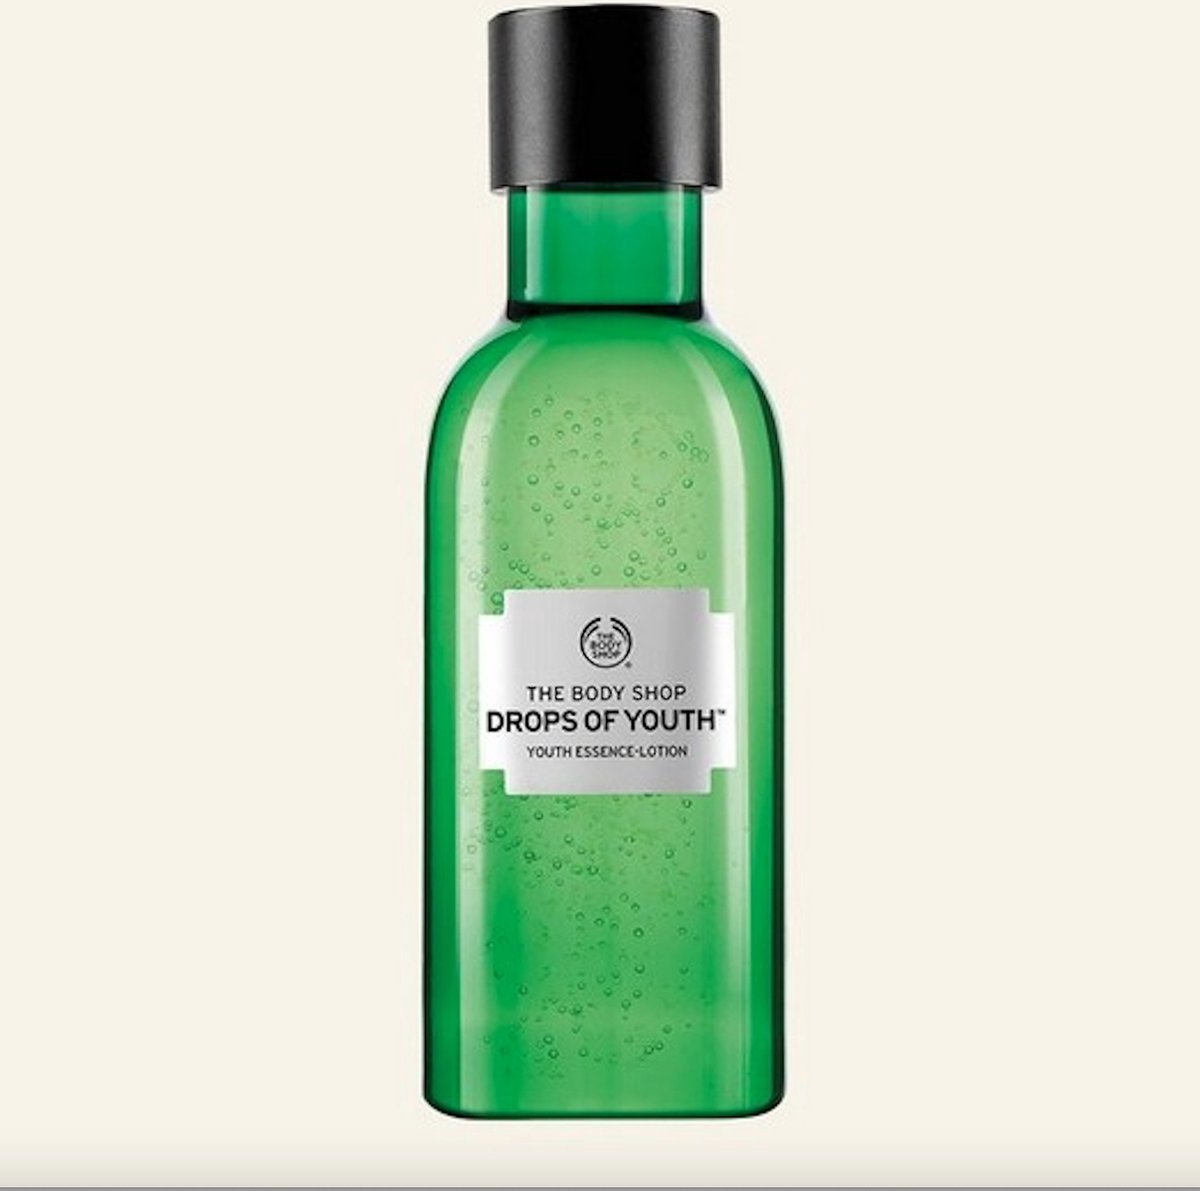 The Body Shop - Drops of Youth™ Youth Essence-Lotion - 160ml - Voor rijpere huid - Bevat edelweiss